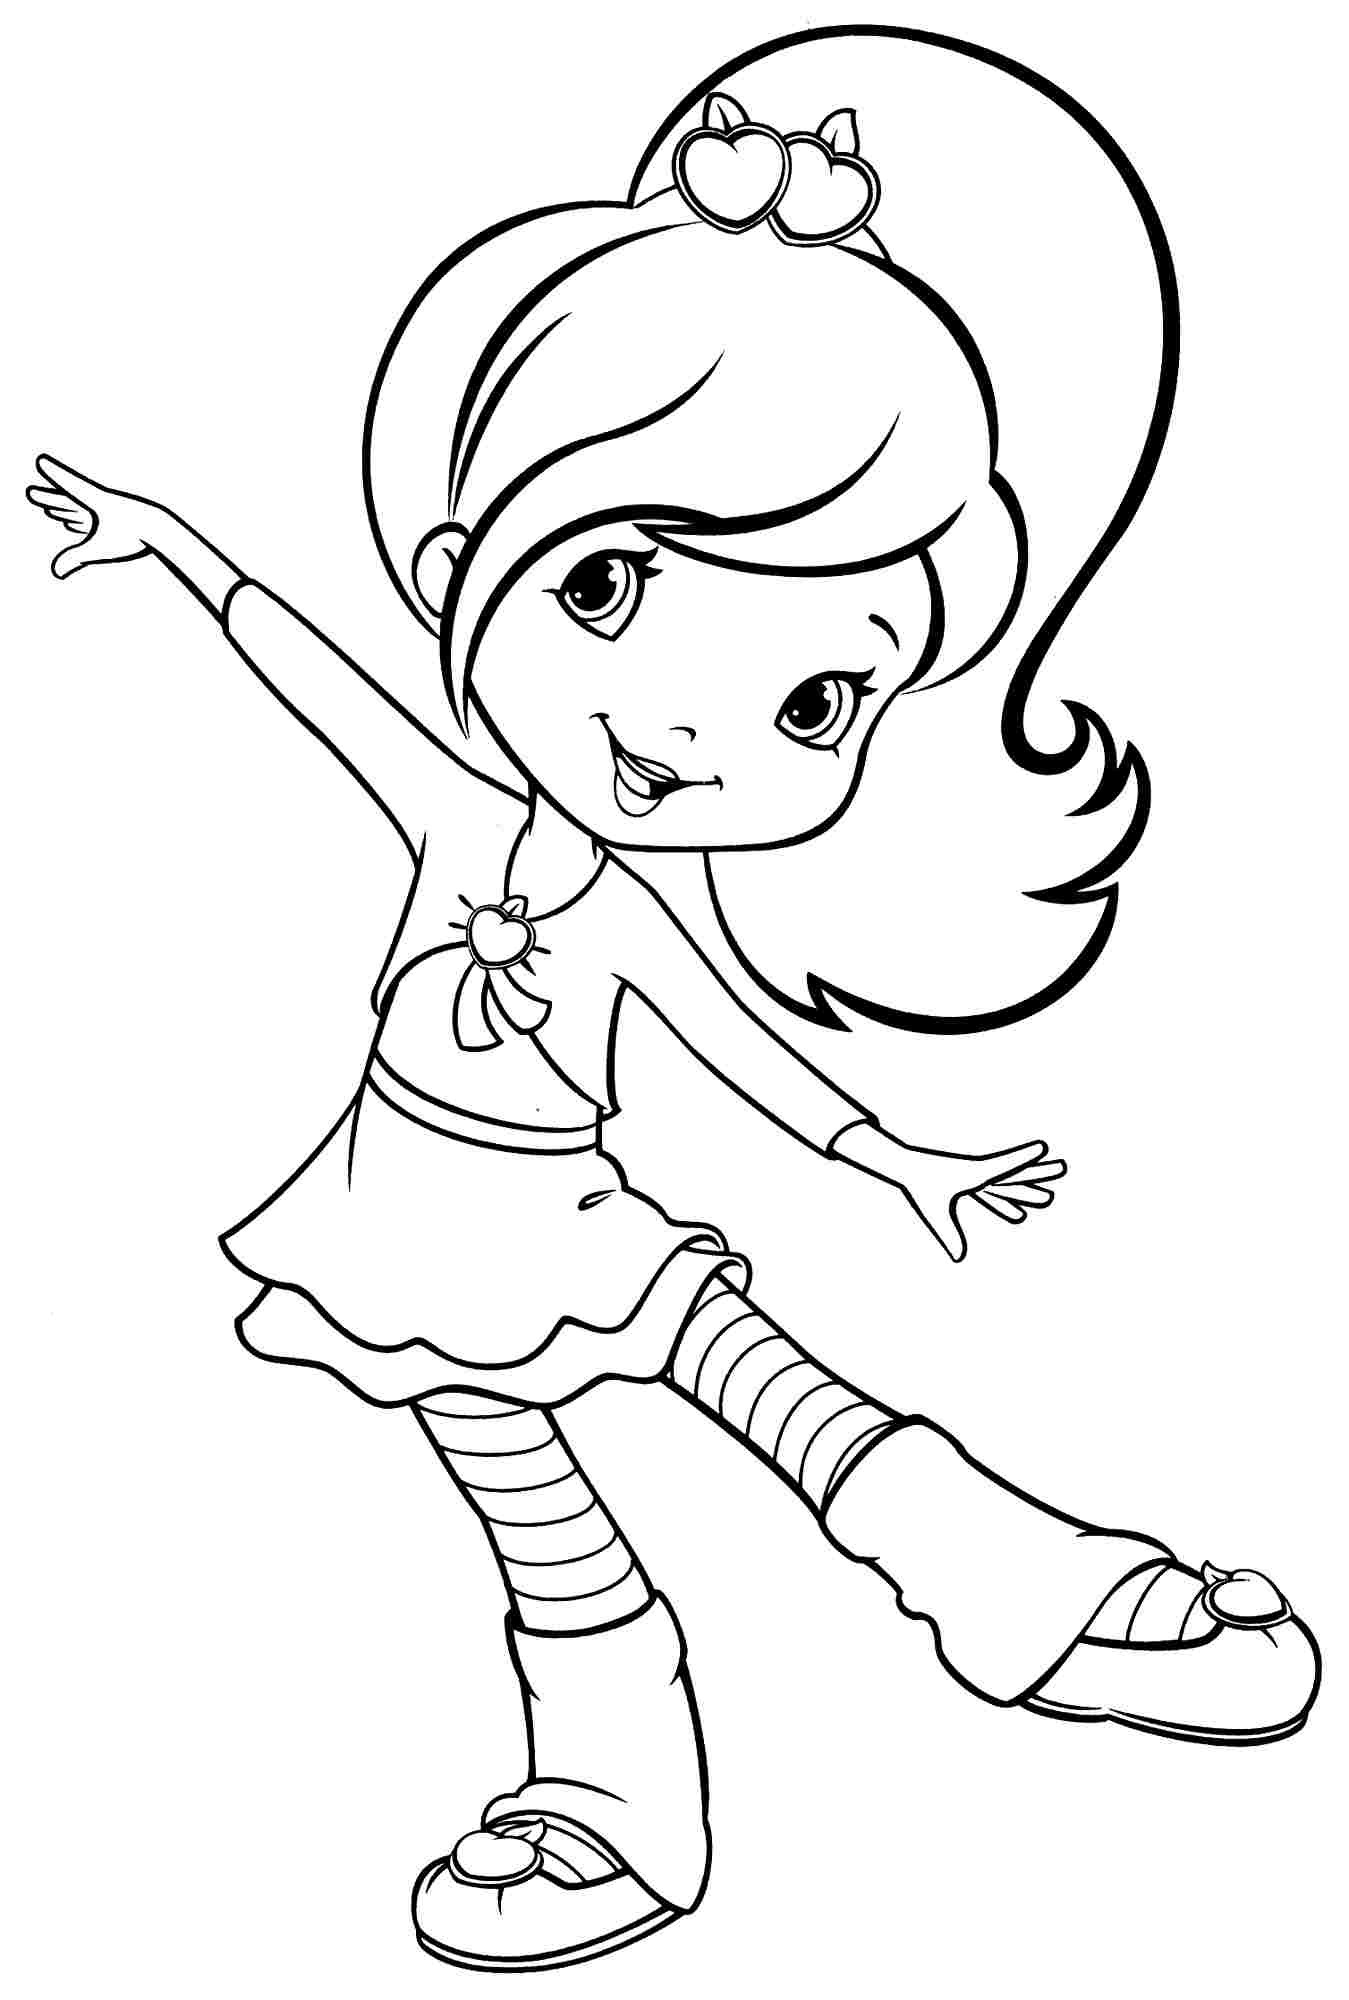 Cute Girl Coloring Sheets For Kids
 Coloring Pages for Girls Best Coloring Pages For Kids